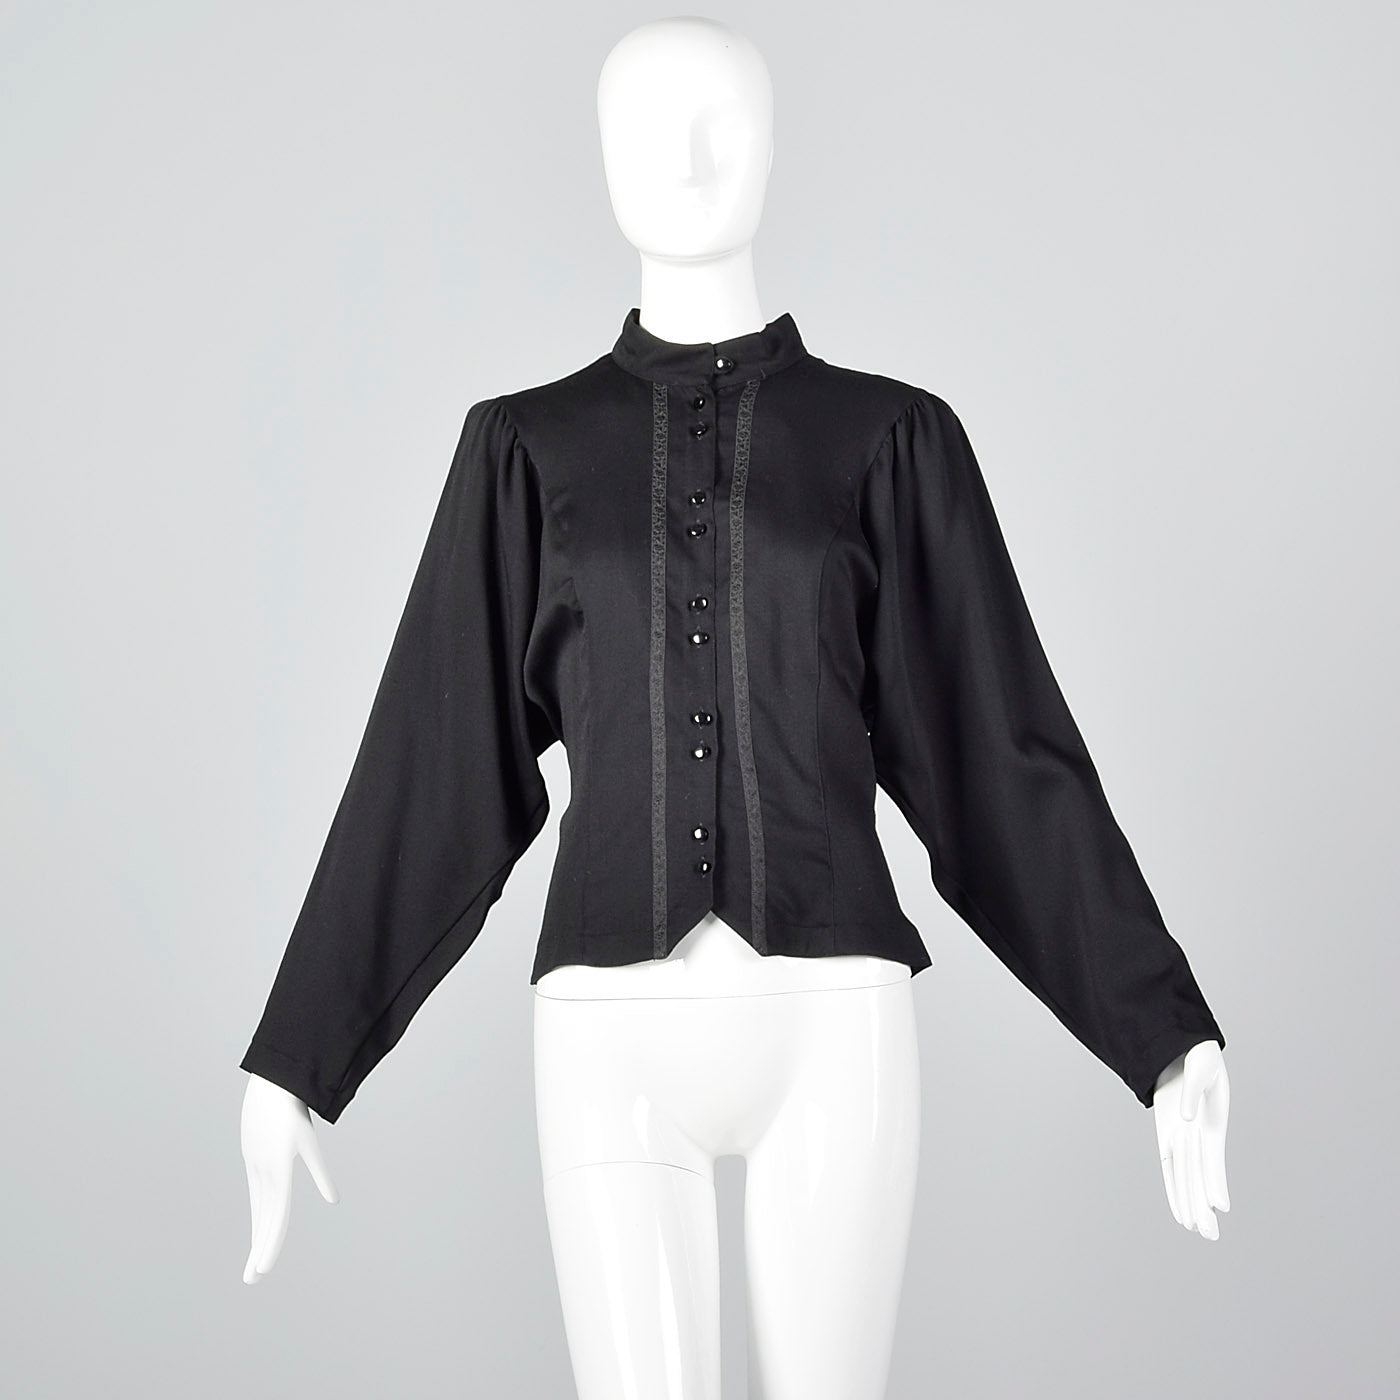 1980s Black Wool Blouse with Floral Trim